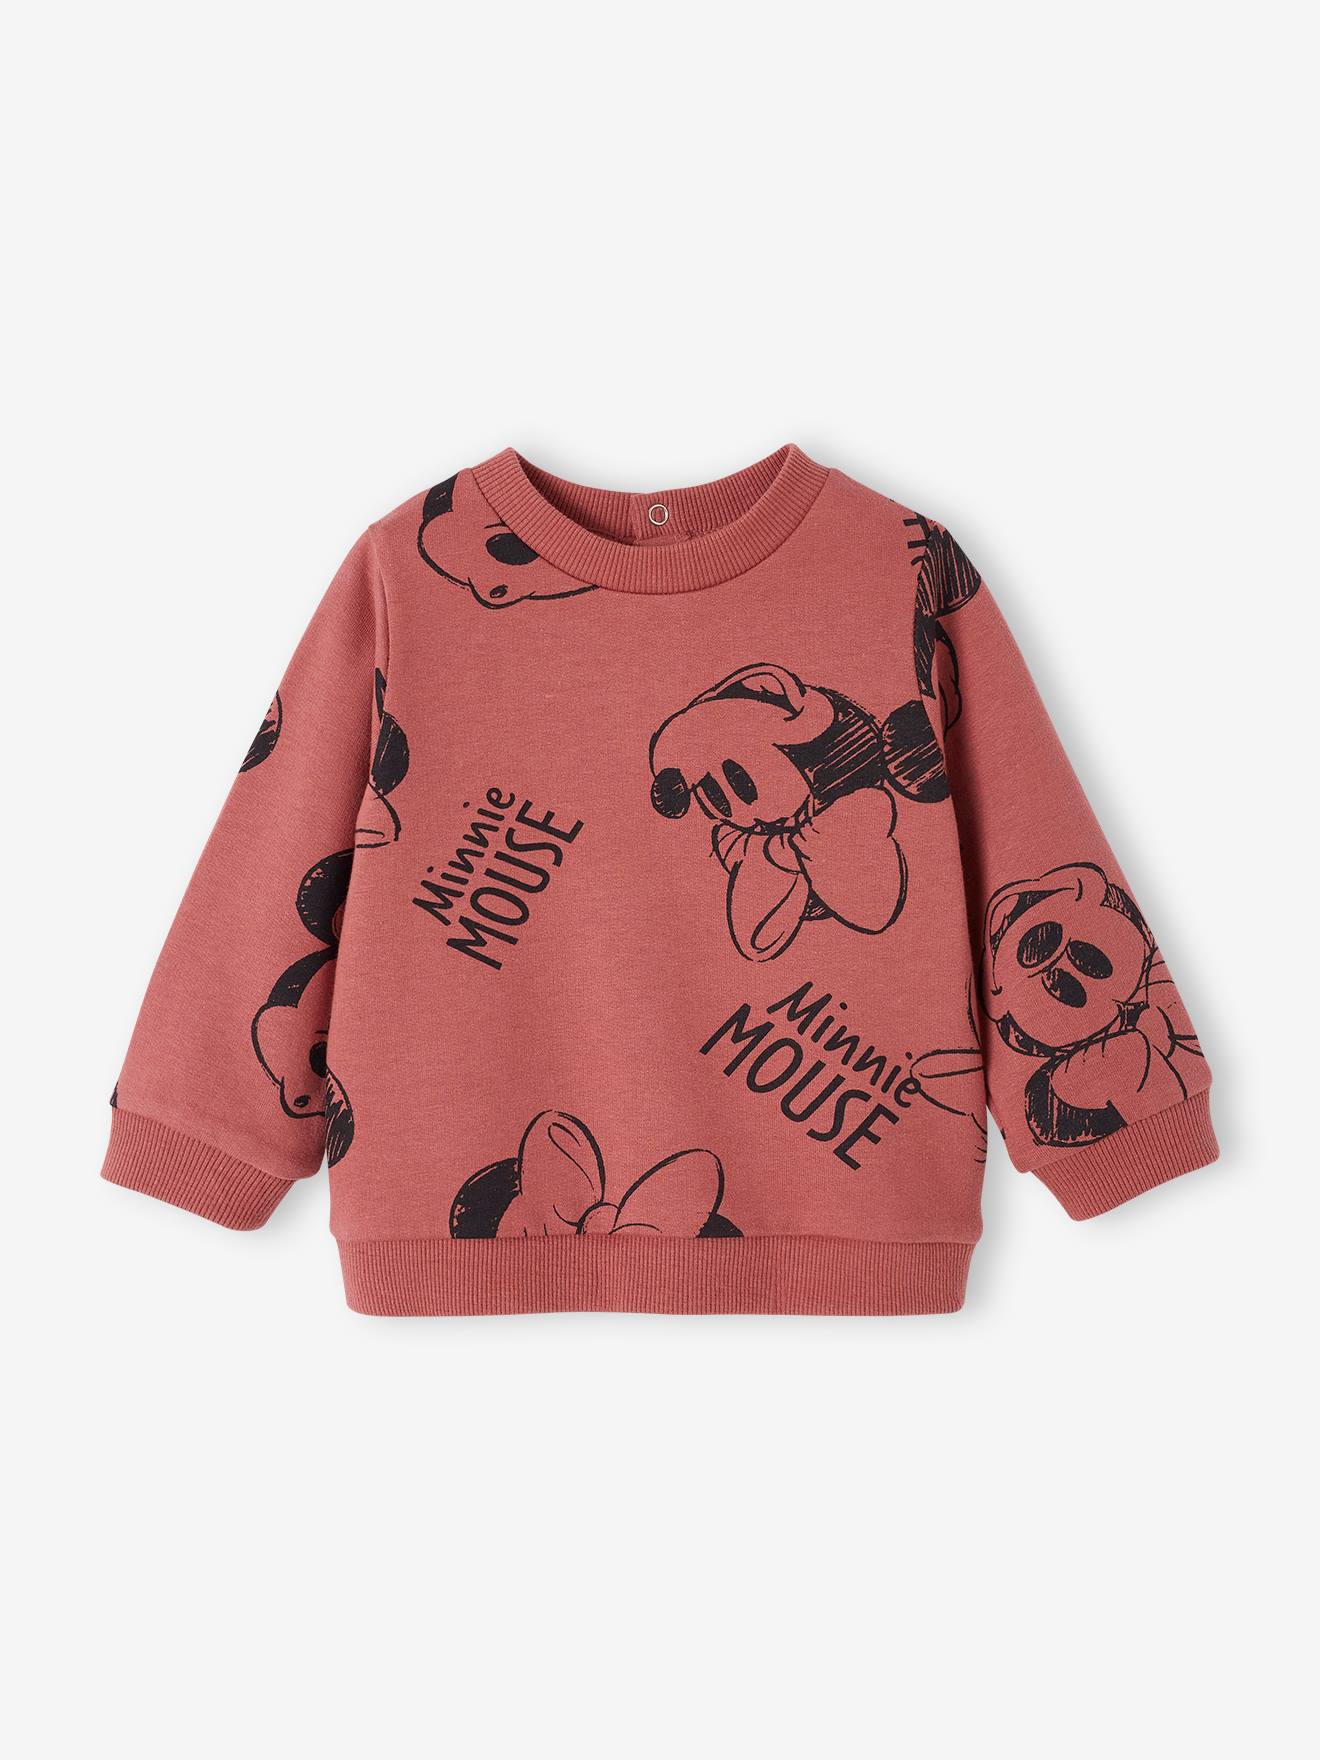 Sweatshirt for Babies, Minnie Mouse by Disney(r) old rose